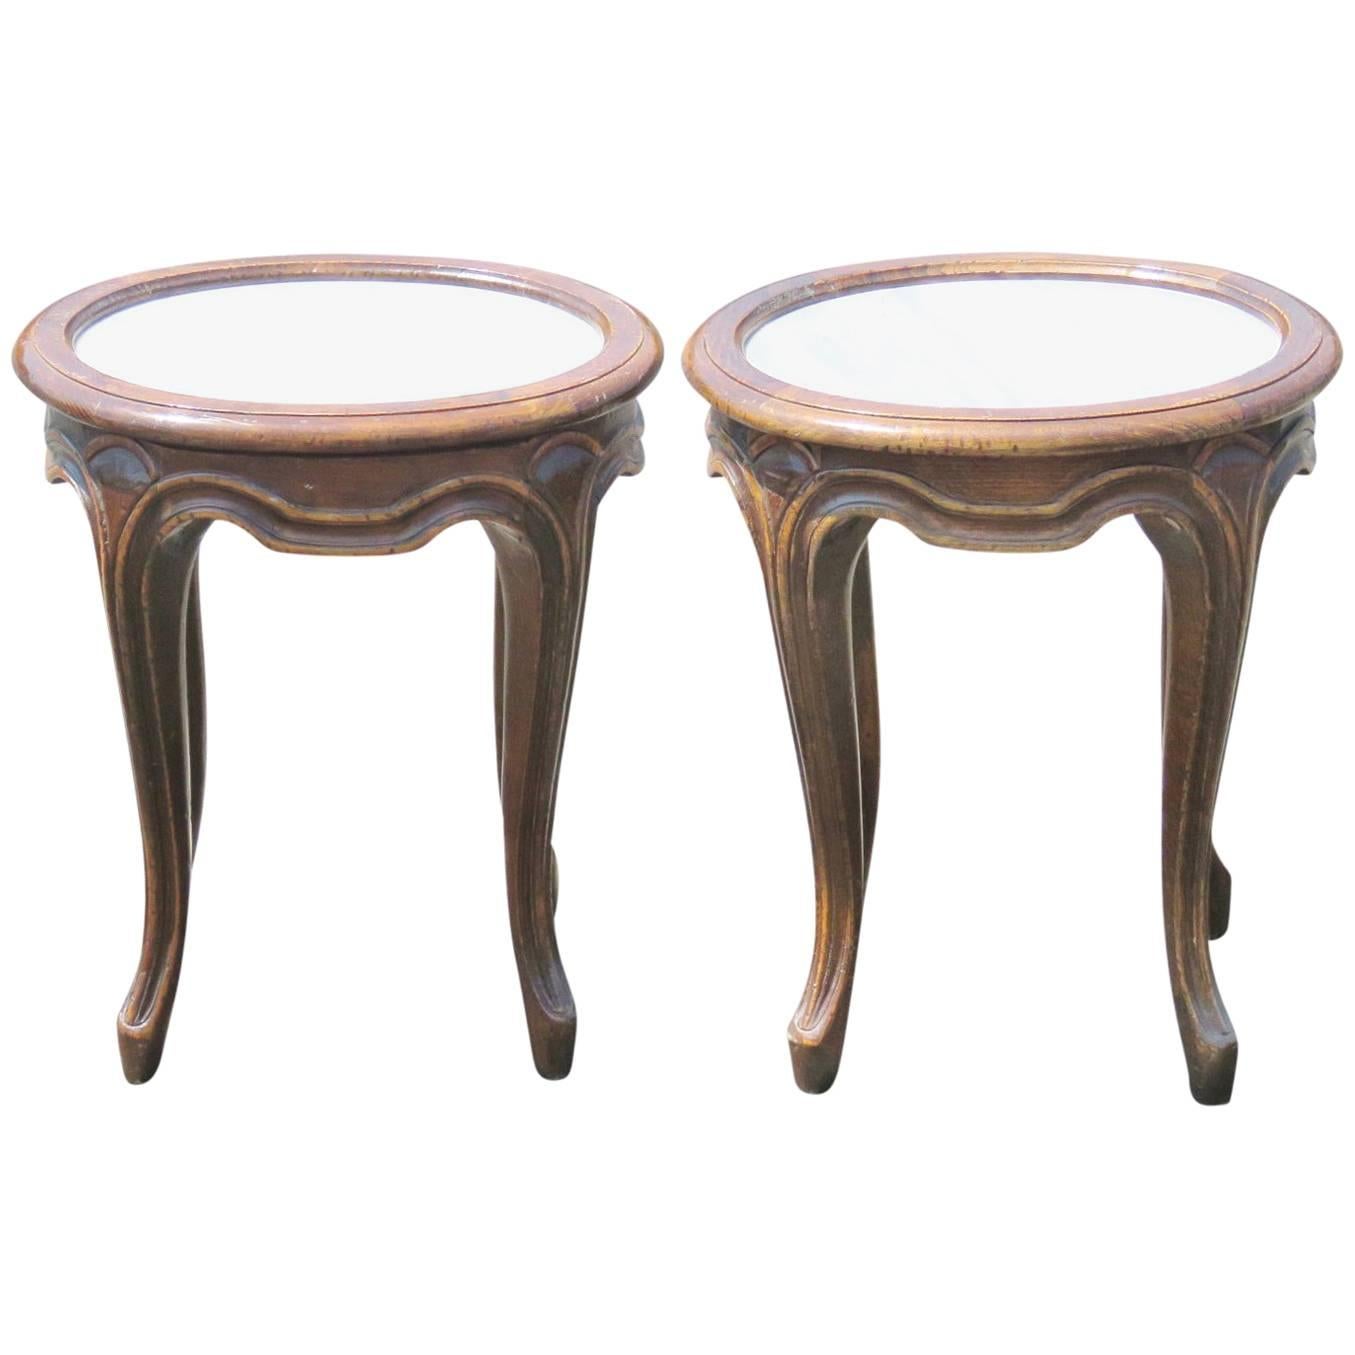 Pair of French Provincial Marbletop Walnut Stands